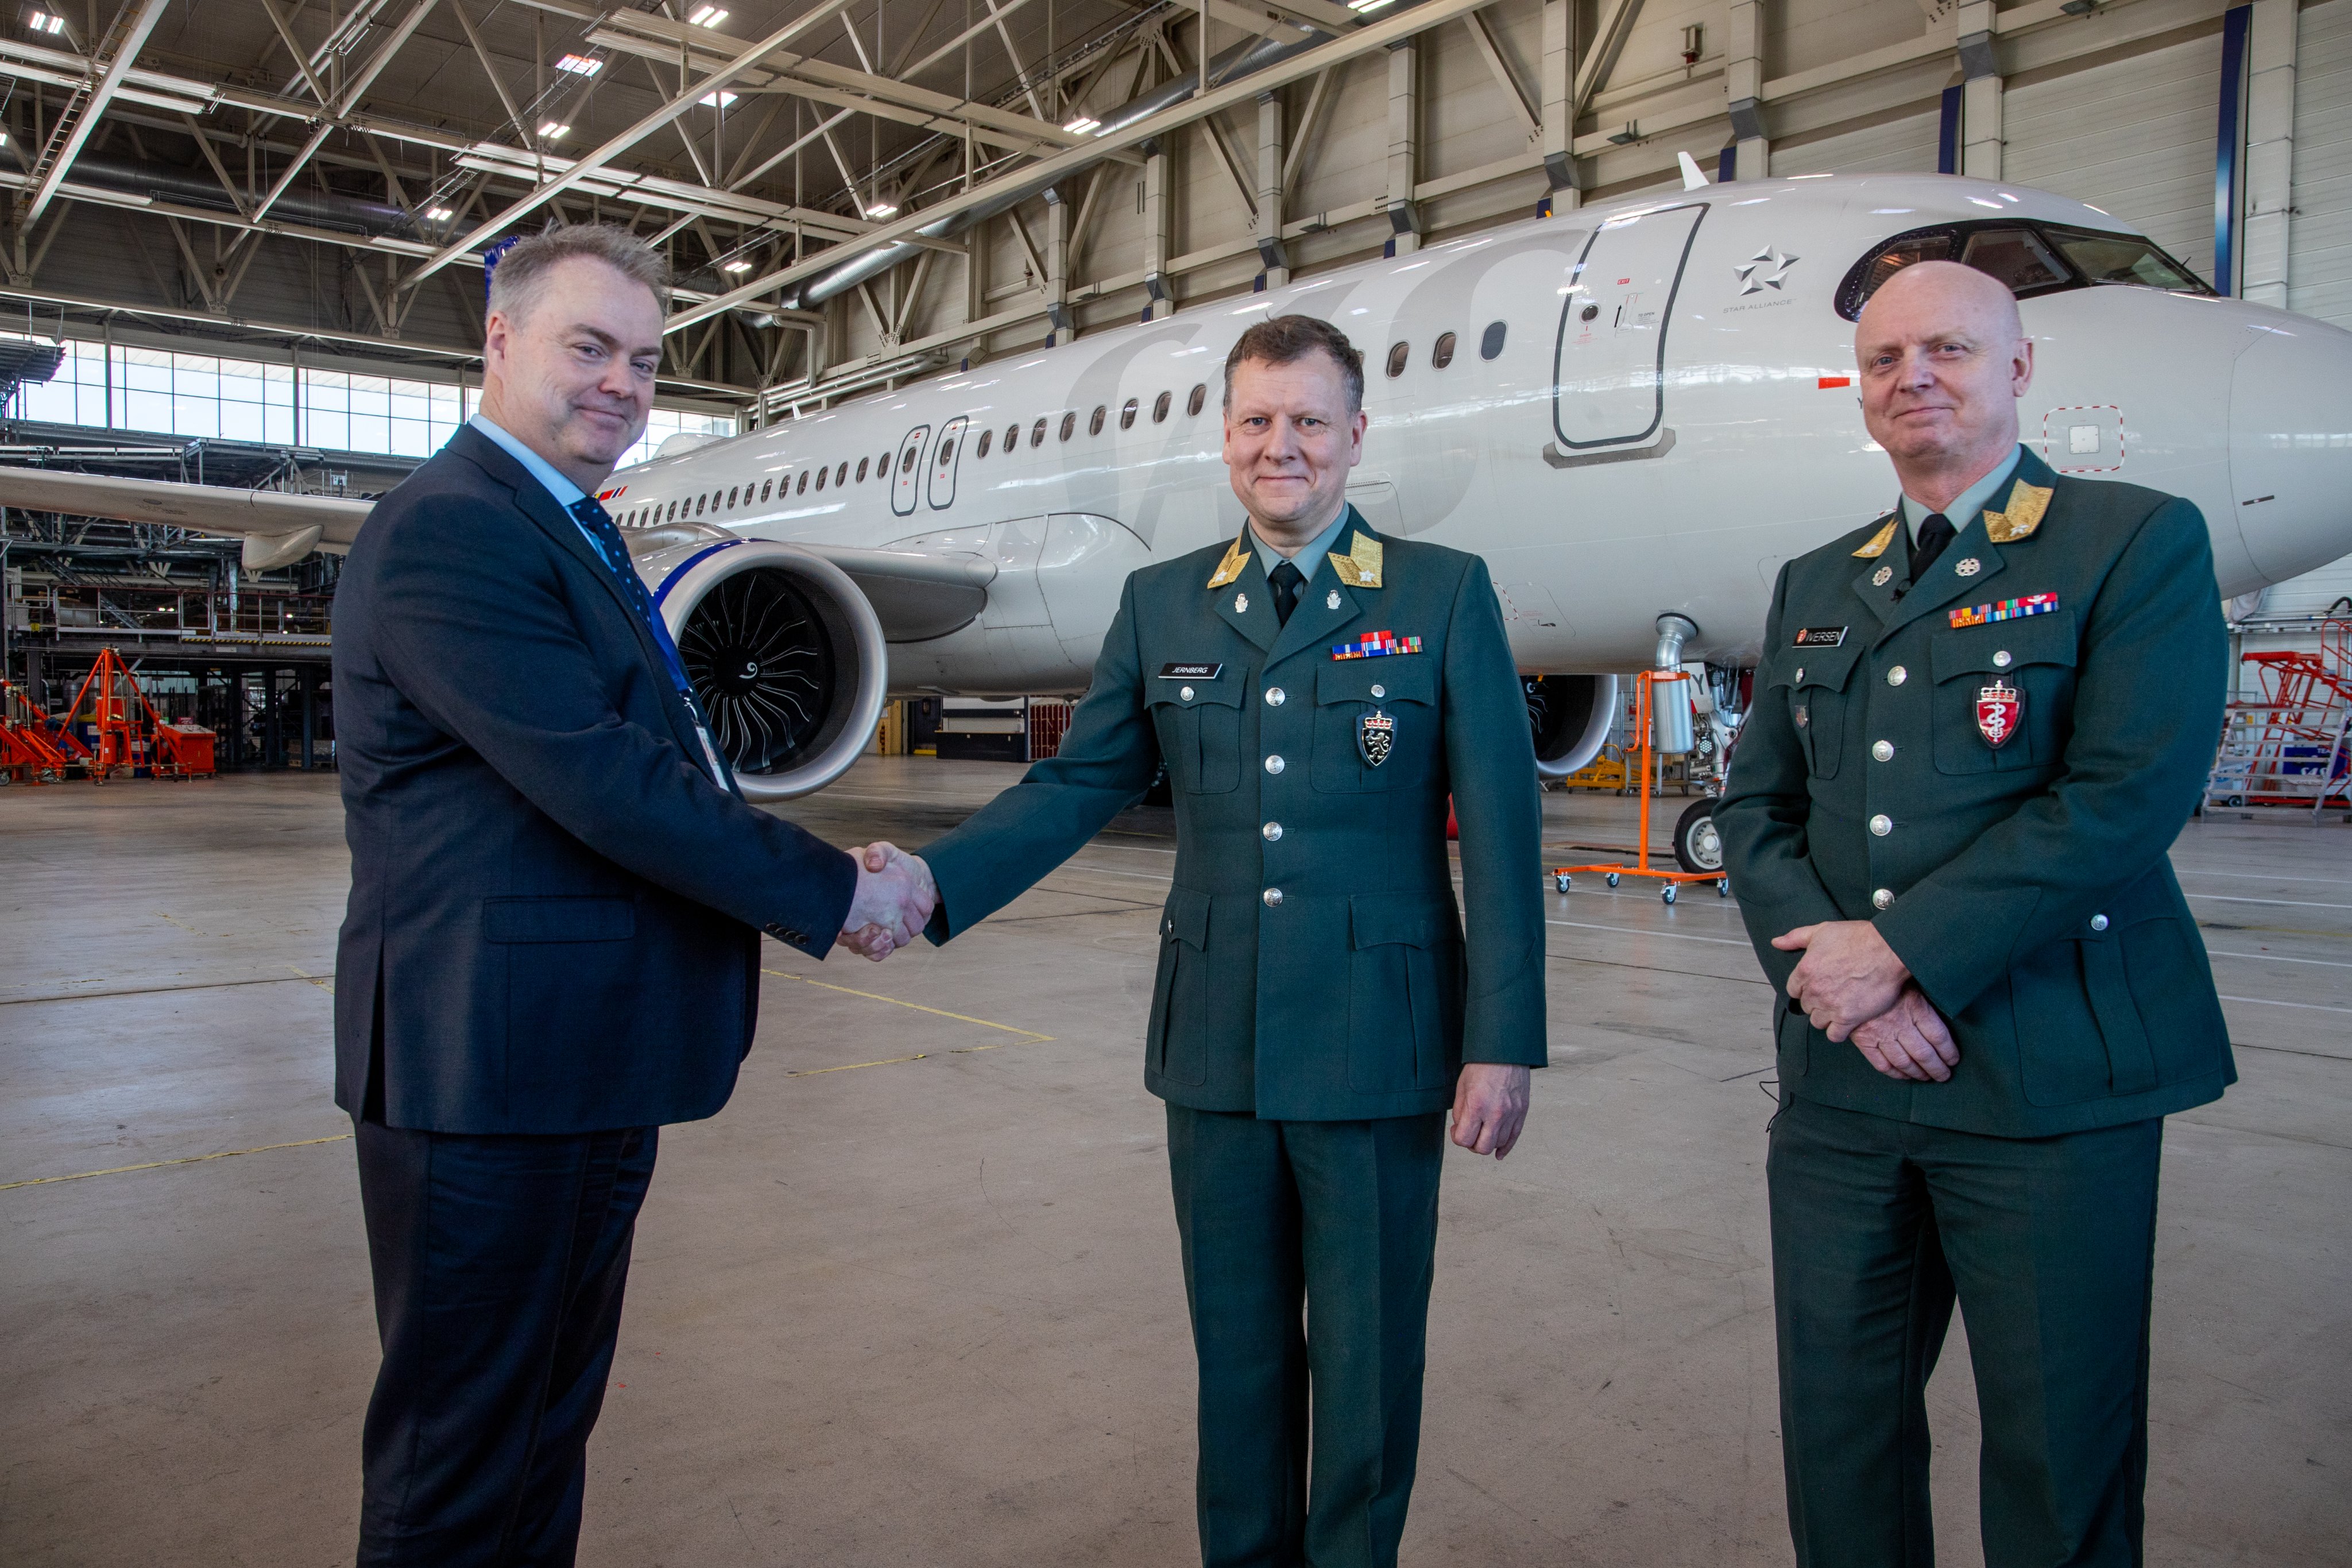 SAS Signs New Agreement With the Norwegian Armed Forces for Strategic Evacuation.